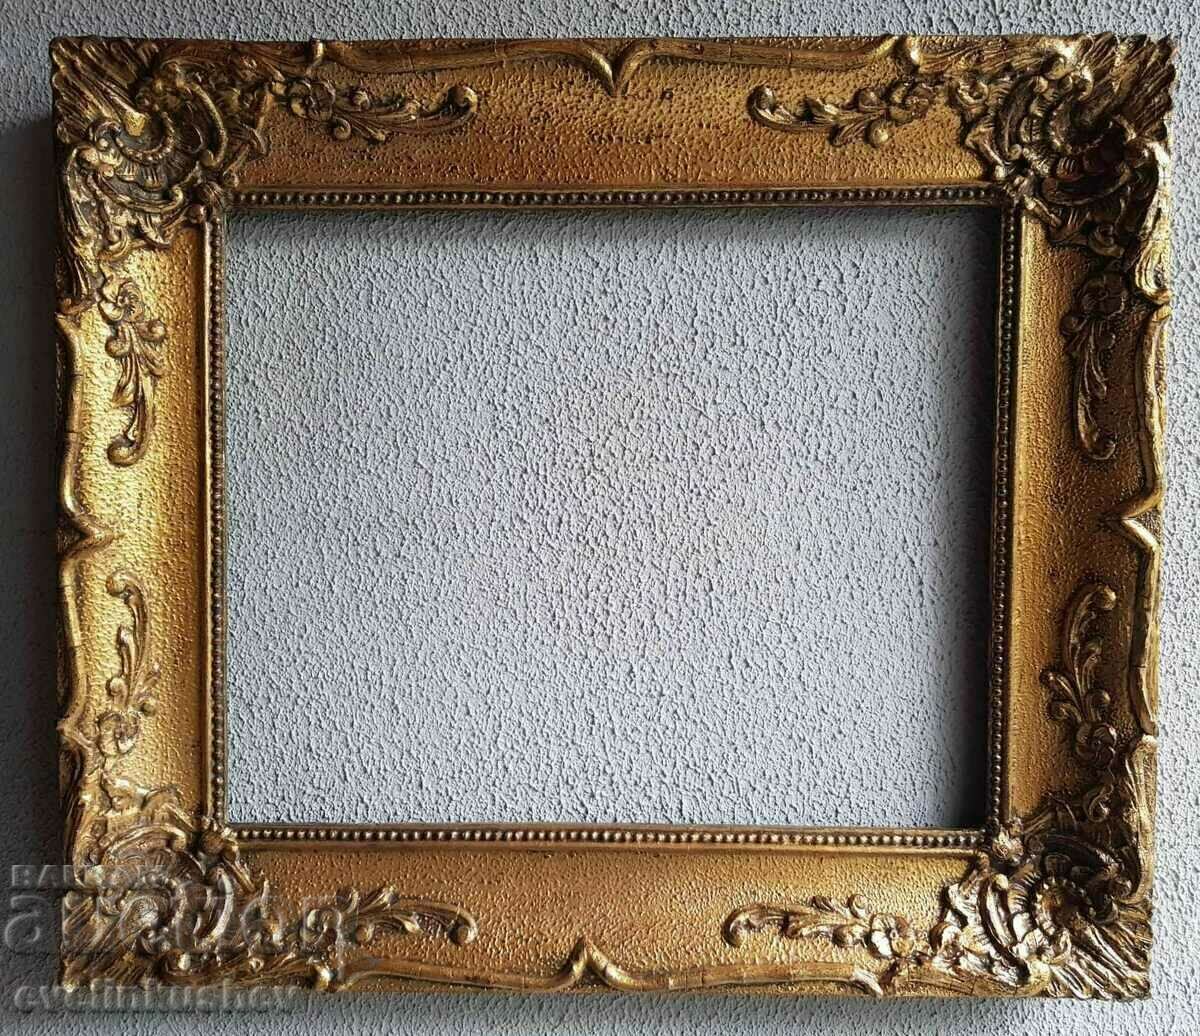 Baroque frame for mirror or picture.